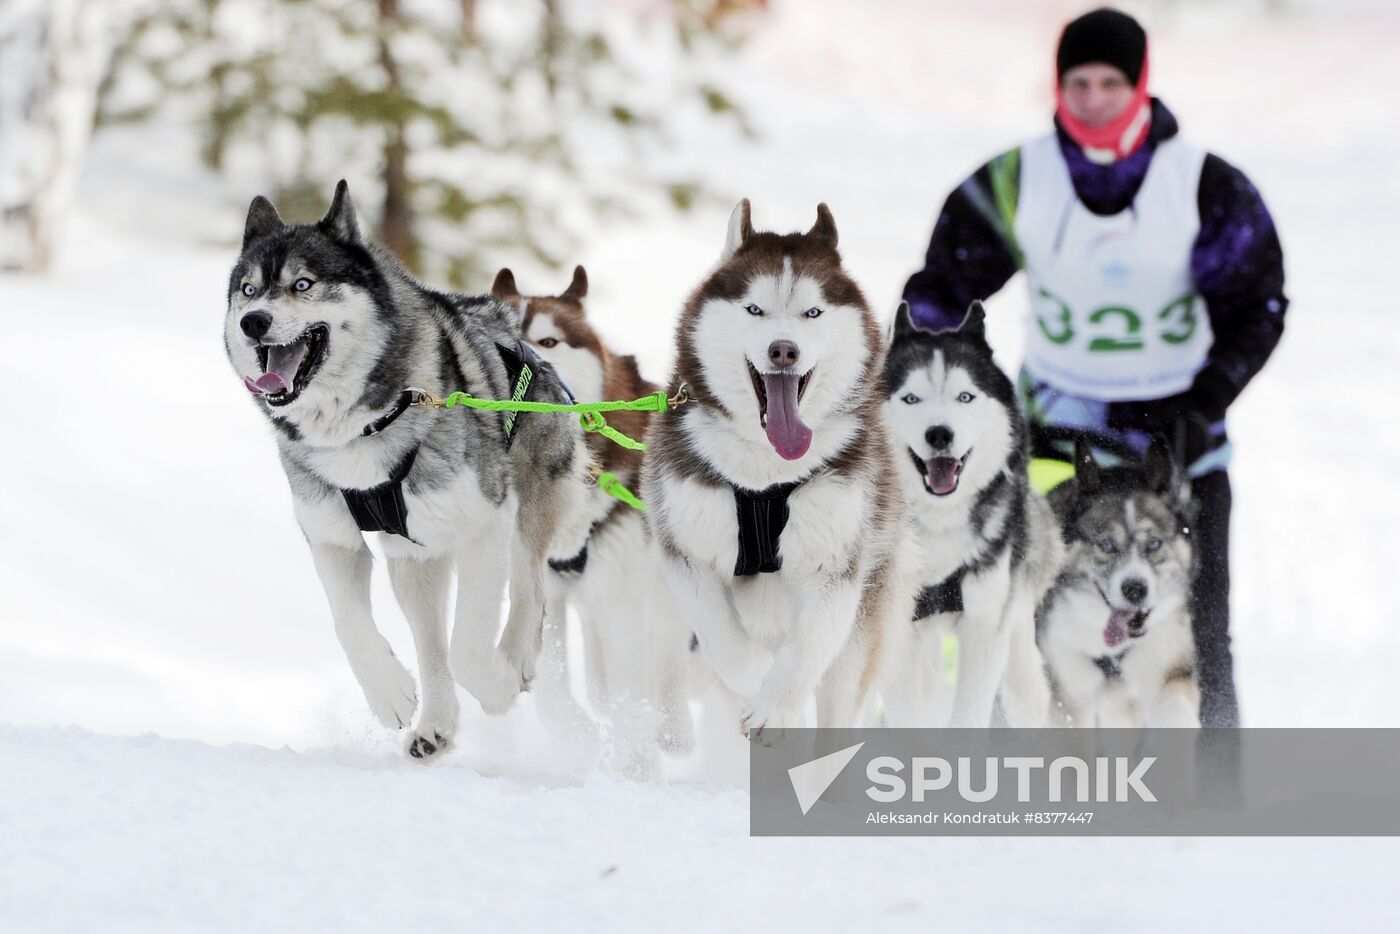 Russia Sled Dog Racing Cup